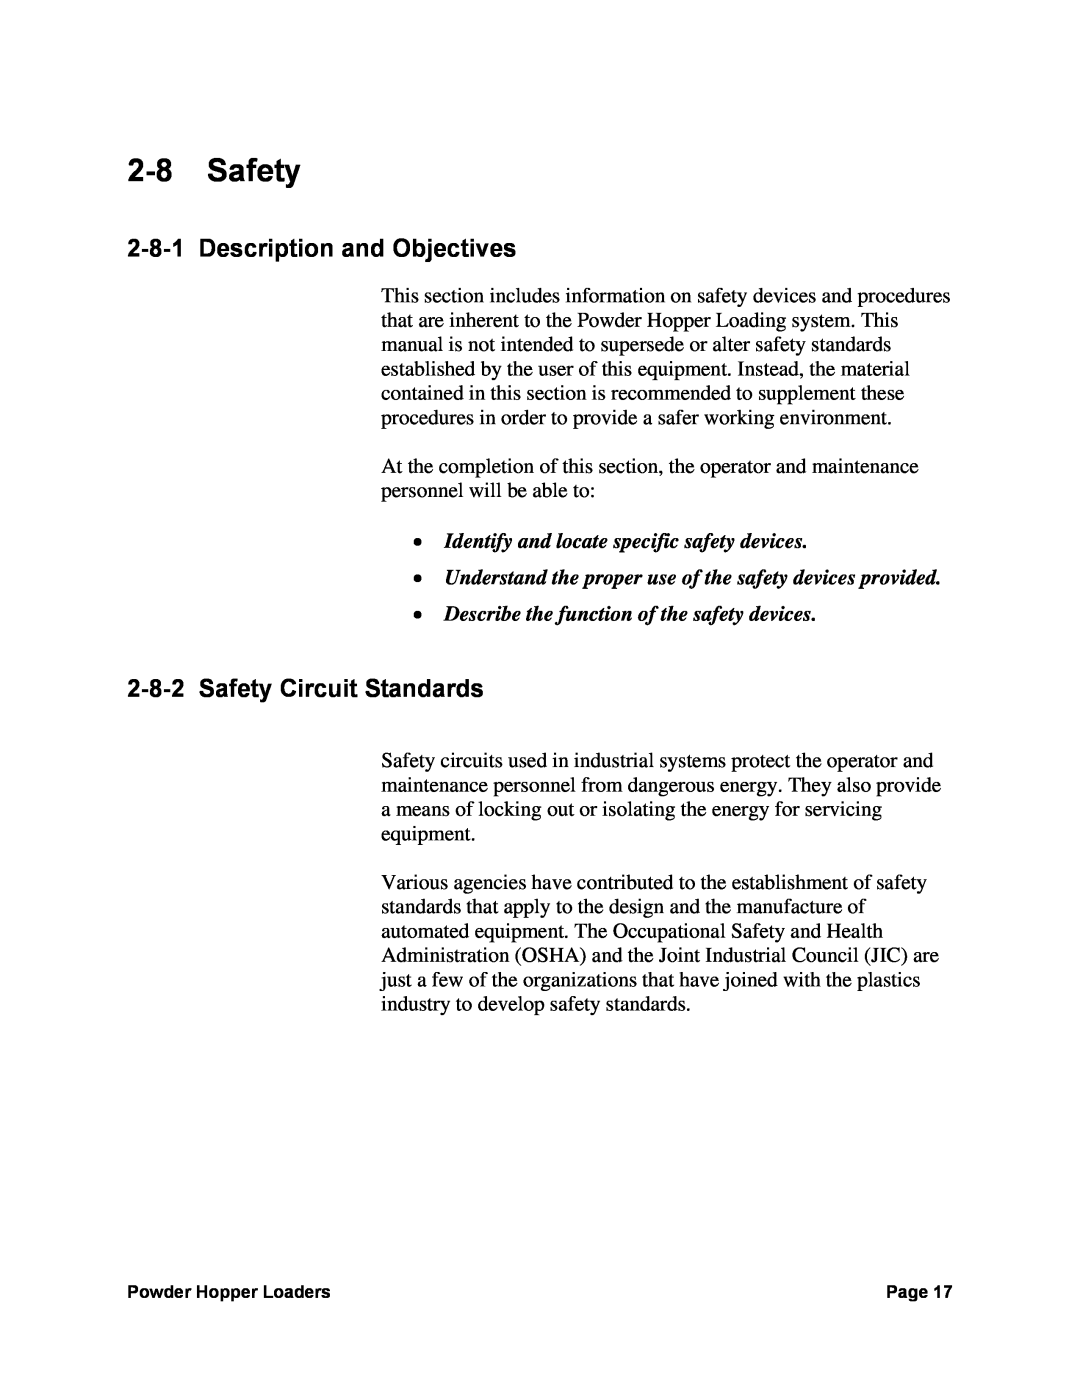 Sterling 238, 882, 0 Description and Objectives, Safety Circuit Standards, Identify and locate specific safety devices 